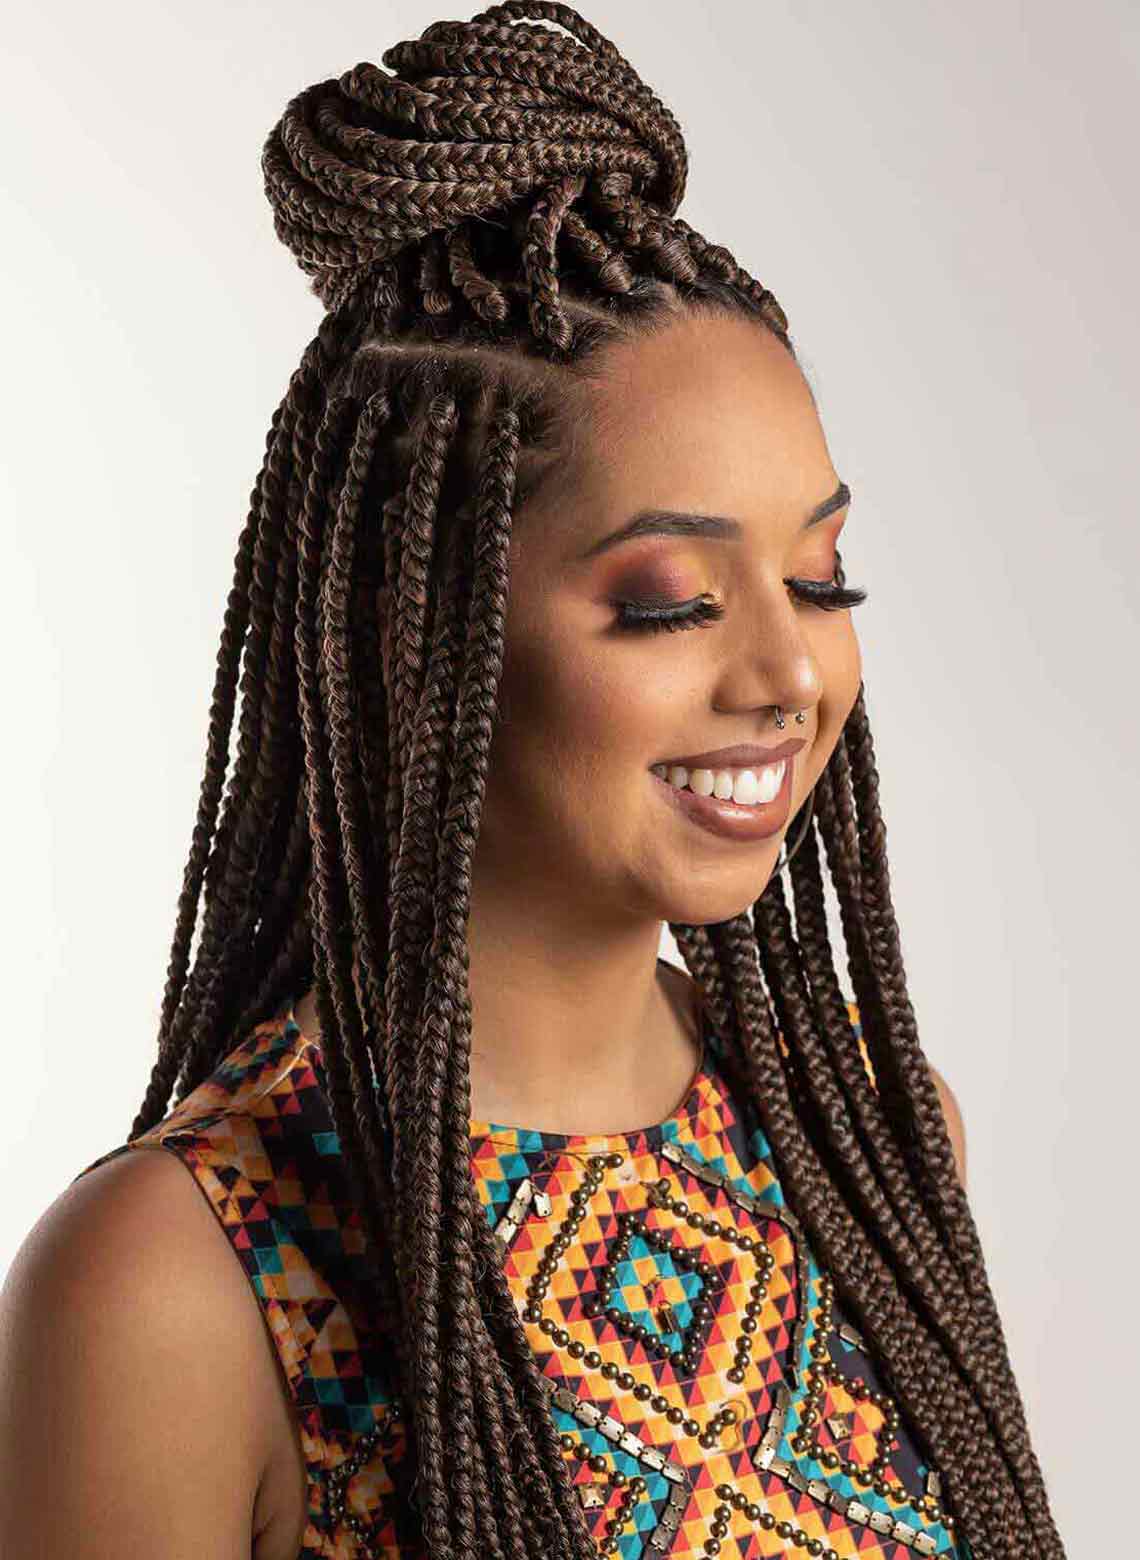 smiling person with eyes closed and wearing a braided bun with some braids hanging down on the sides, wearing a colorful geometric top and septum piercing